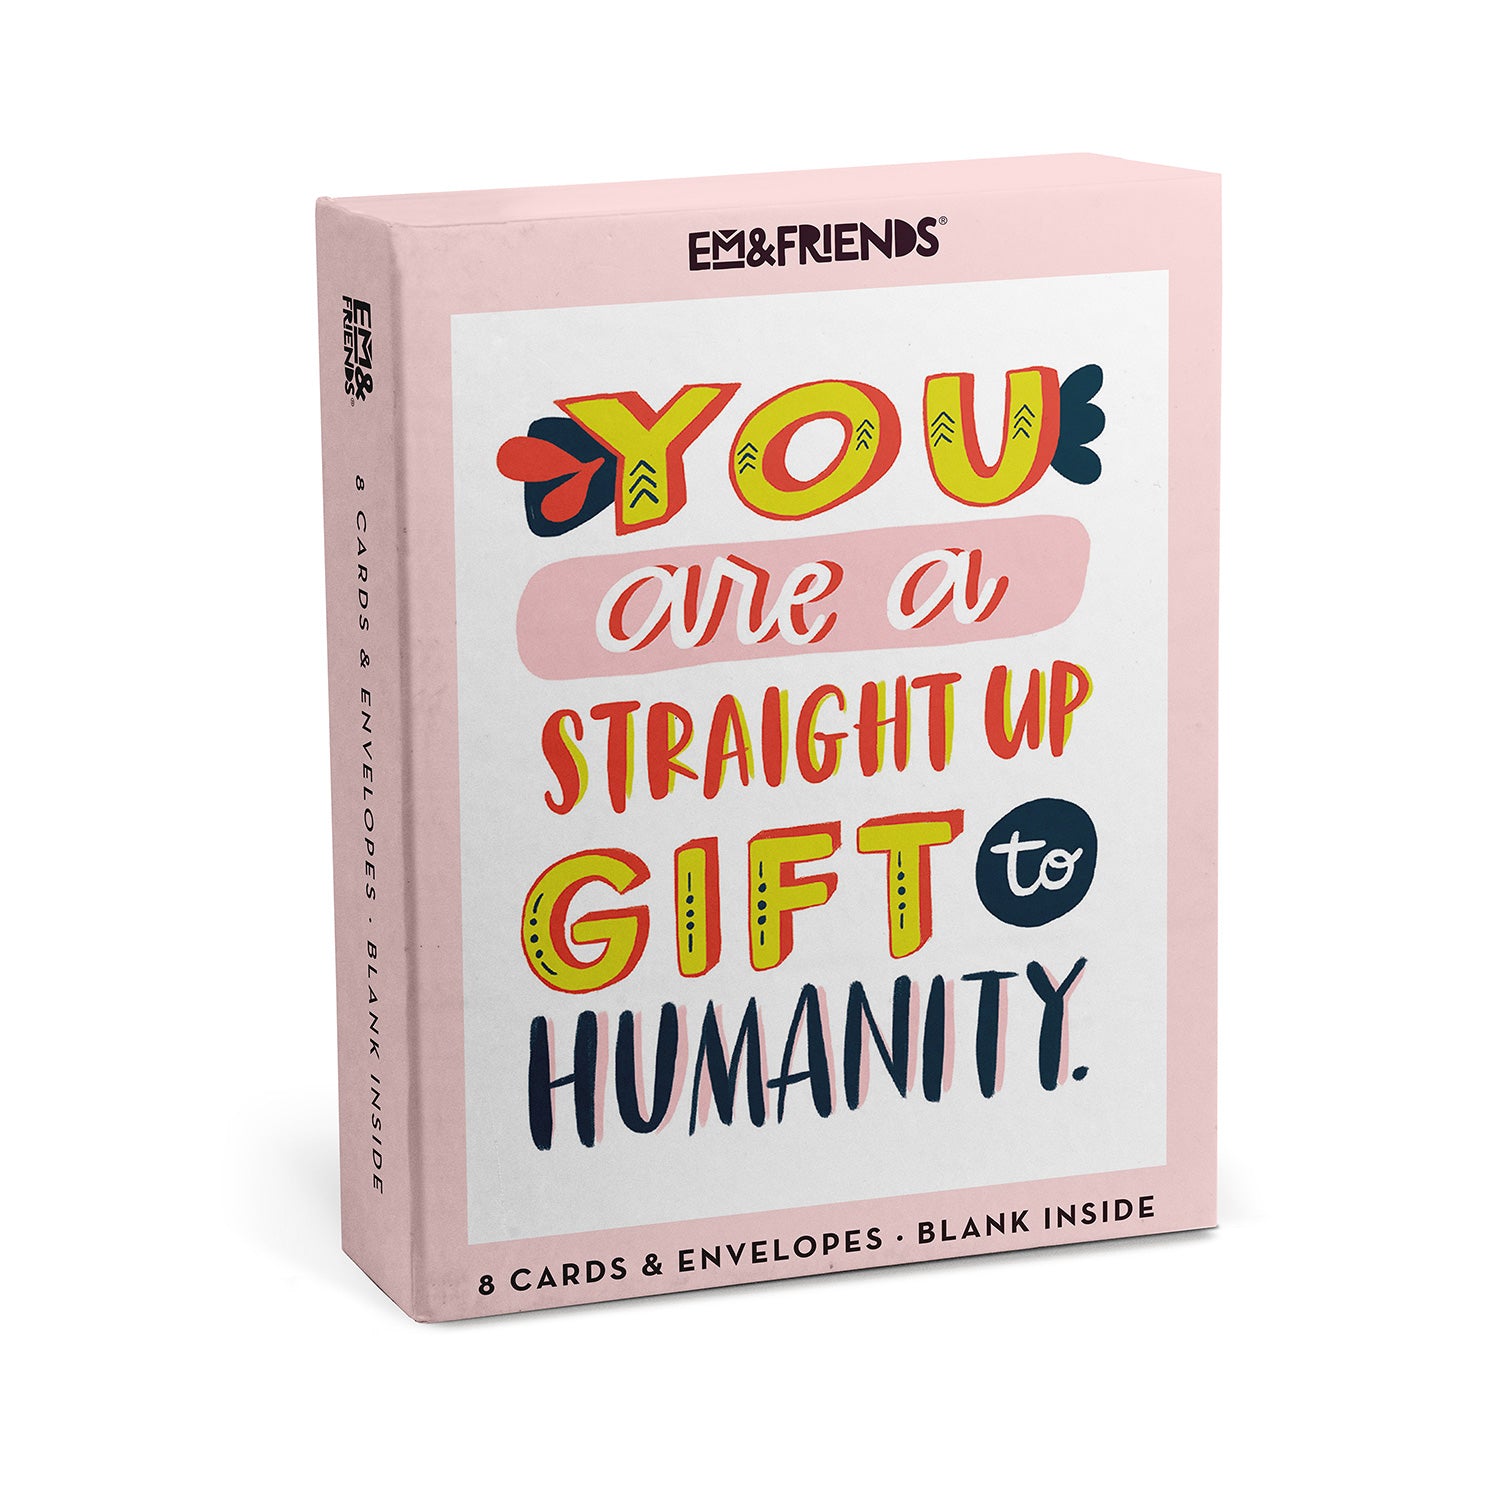 Gift To Humanity Card, Box Of 8 Single Encouragement Cards